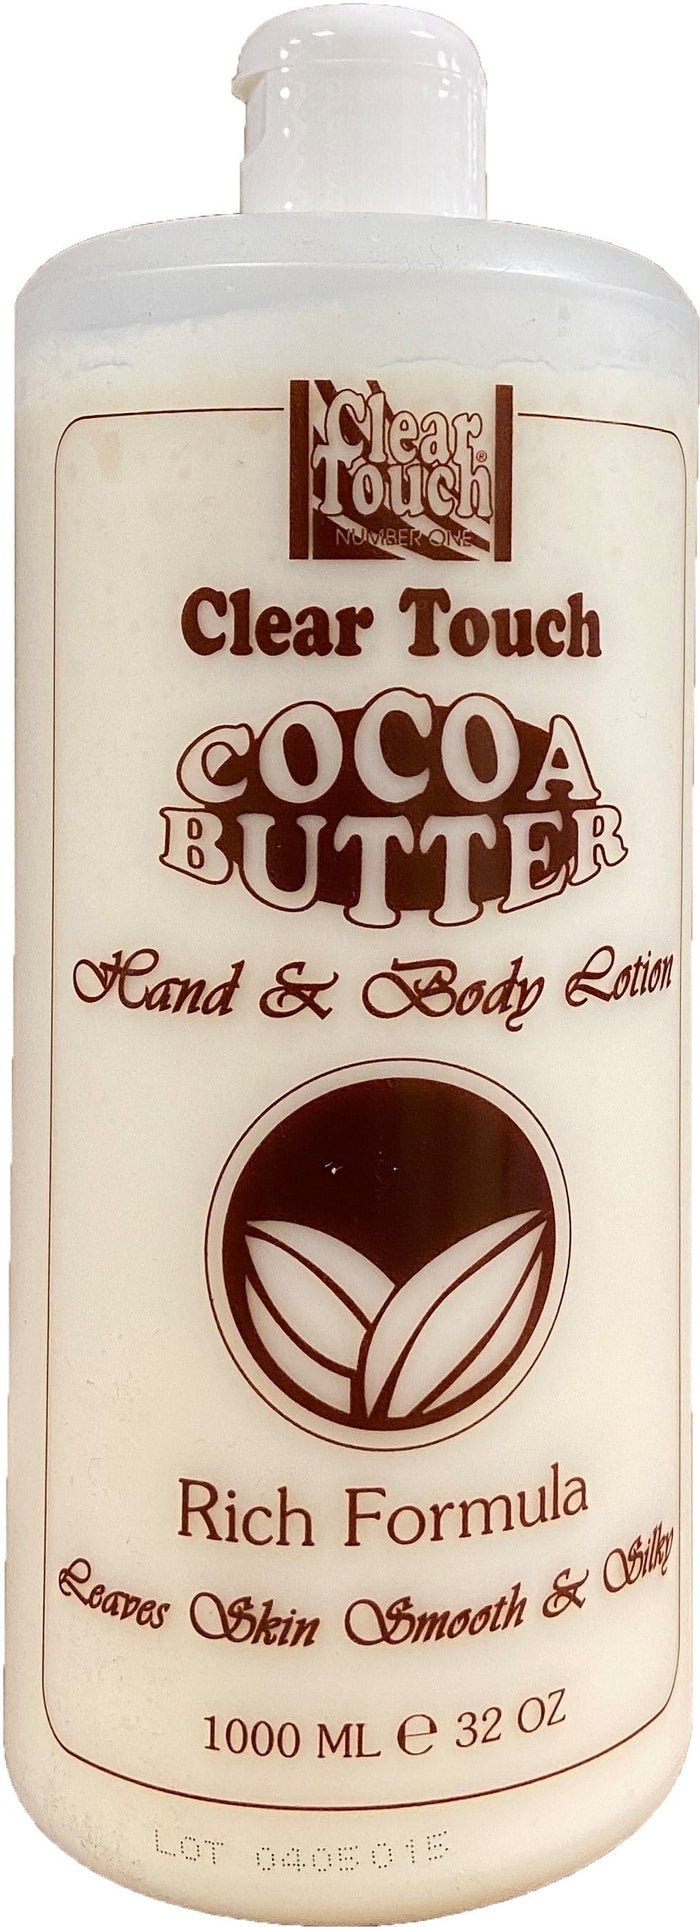 Clear Touch Cocoa Butter Hand and Body Lotion 1000 ml